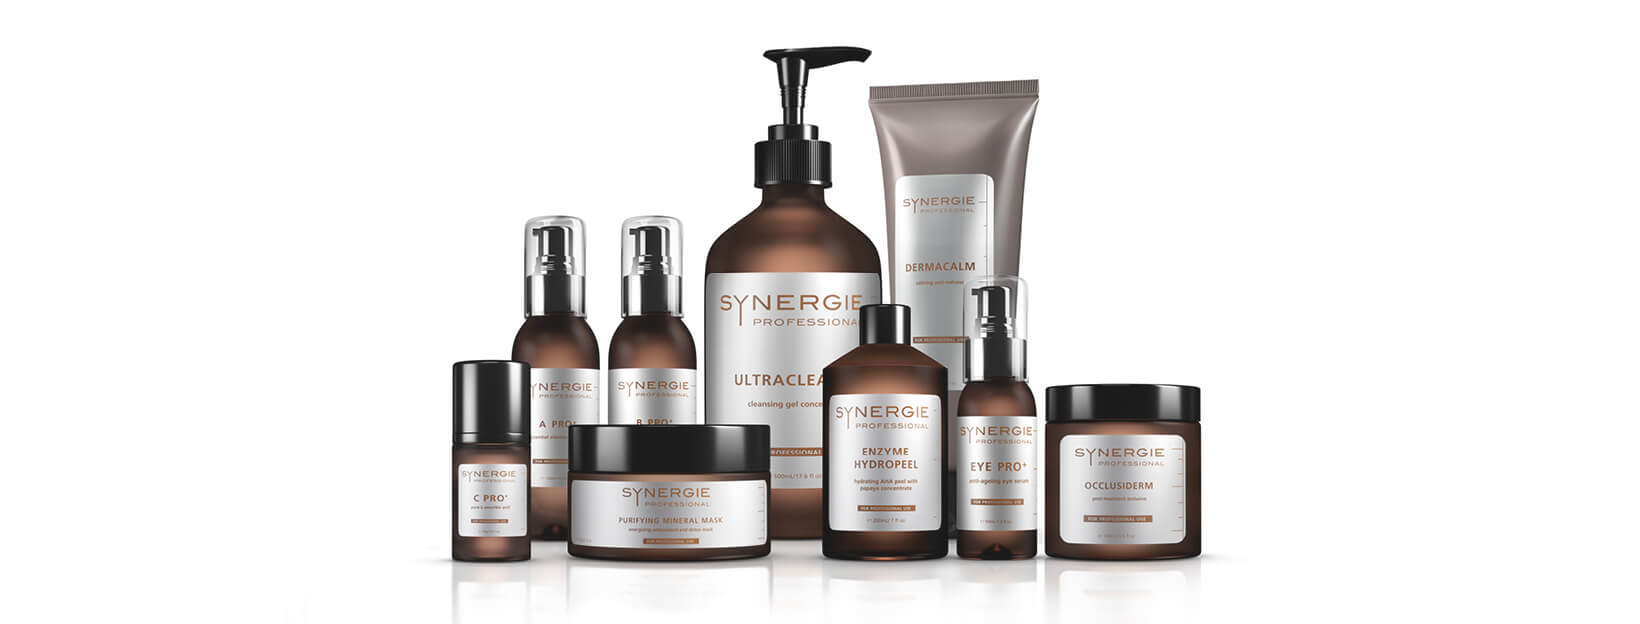 Synergie Products